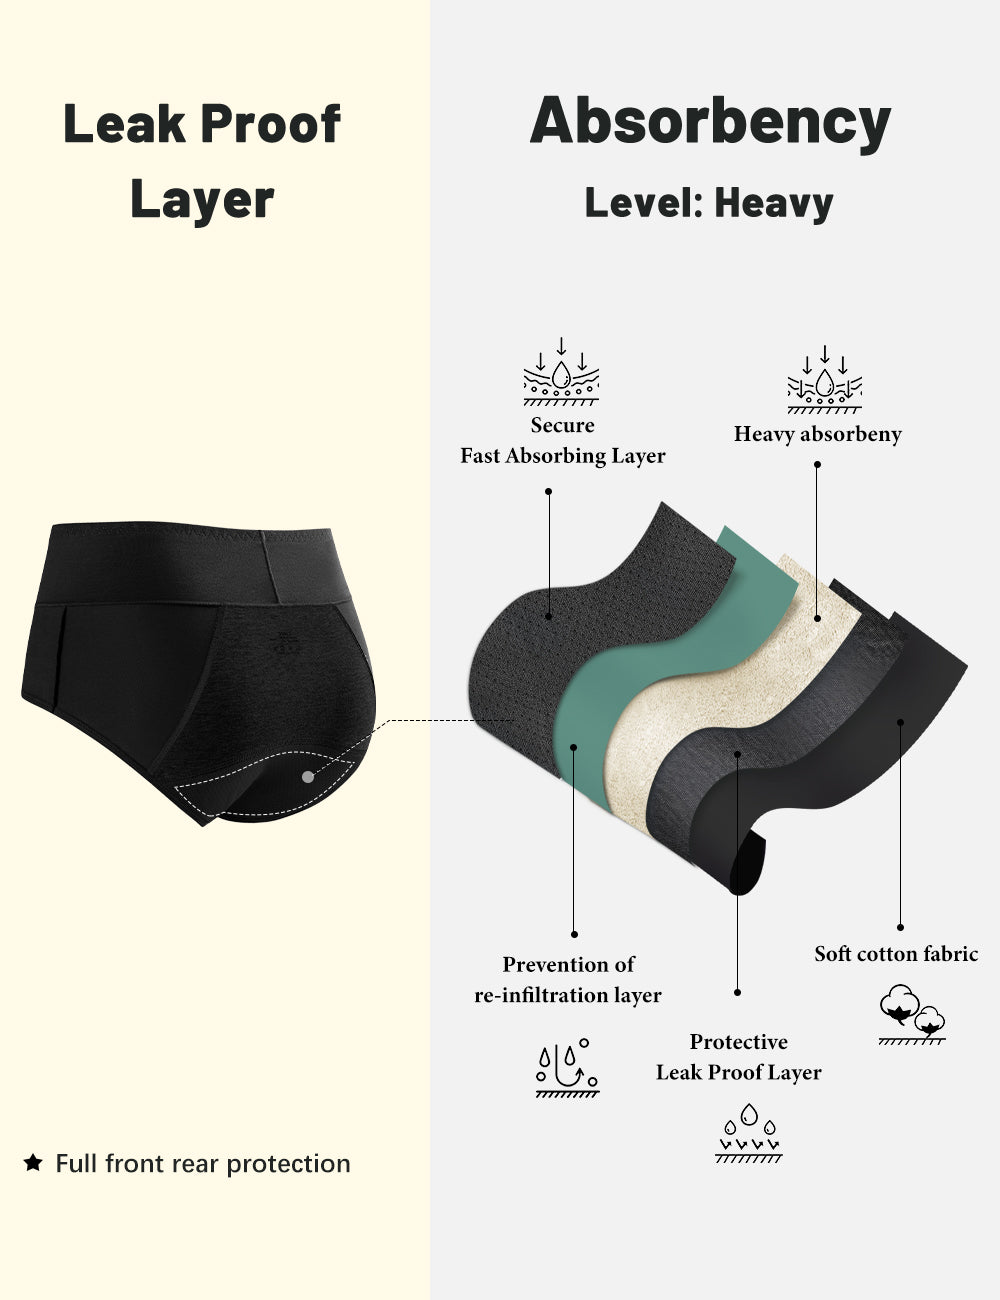 Waterproof Physiological Cotton Incontinence Briefs For Women For Women  Leak Proof Menstrual Period Underwear In Plus Size From Ugrif, $14.19